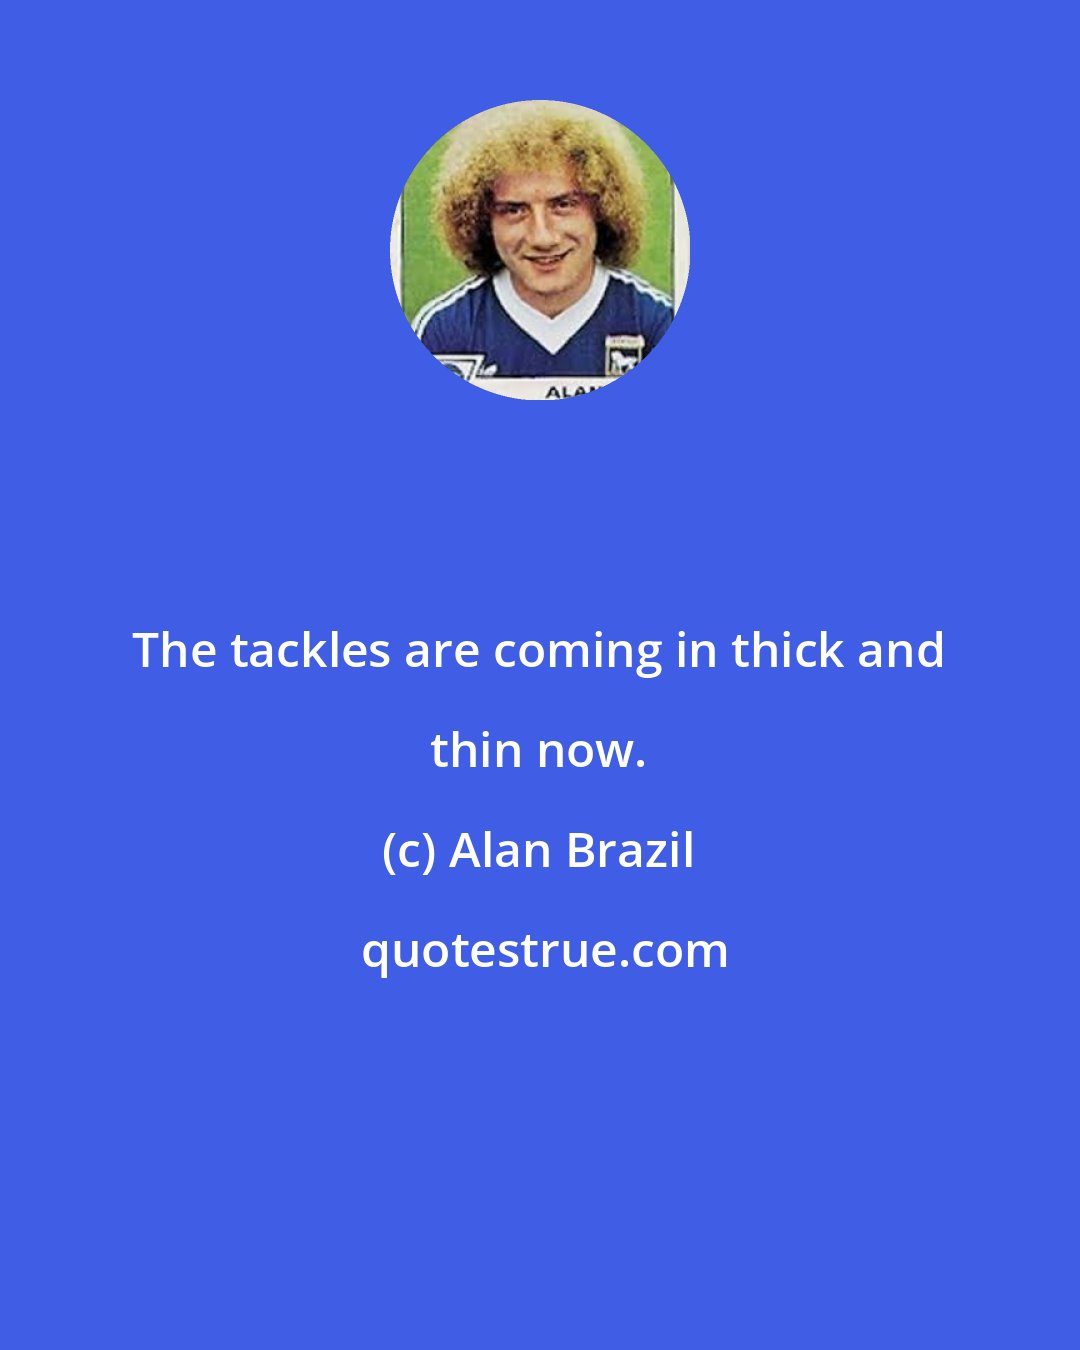 Alan Brazil: The tackles are coming in thick and thin now.